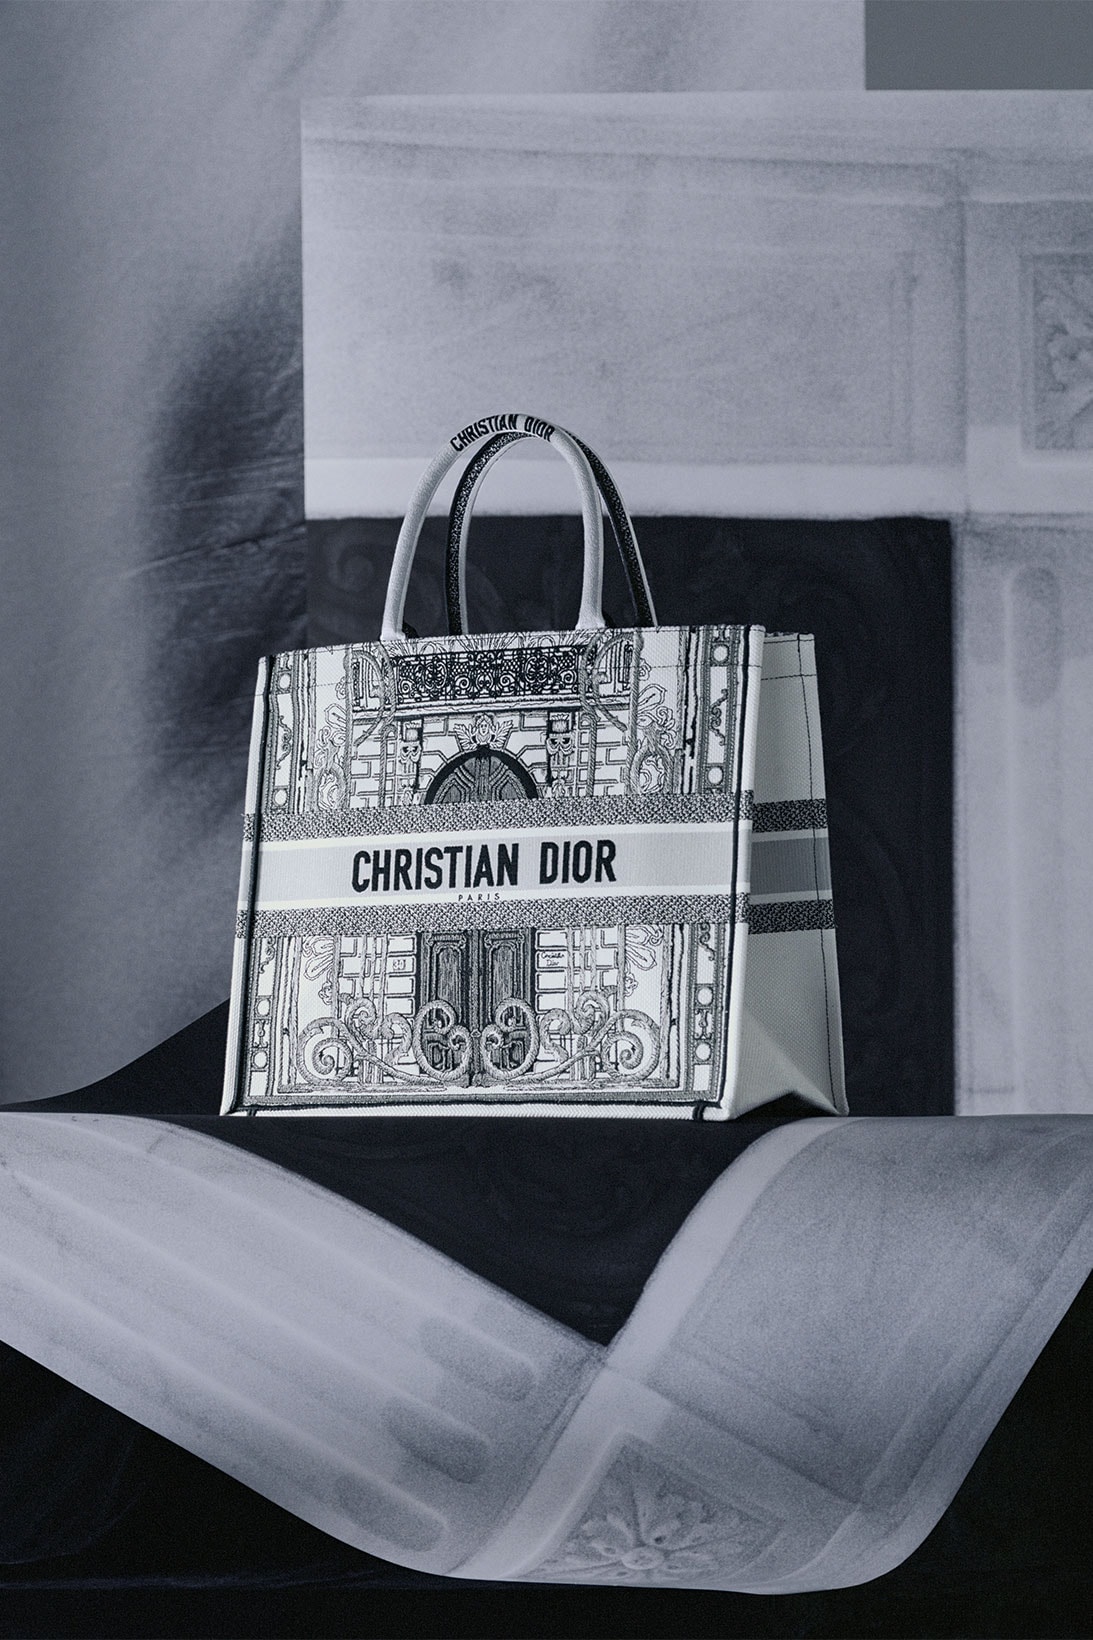 Dior hopes another 'icon' is in the bag with new 30 Montaigne